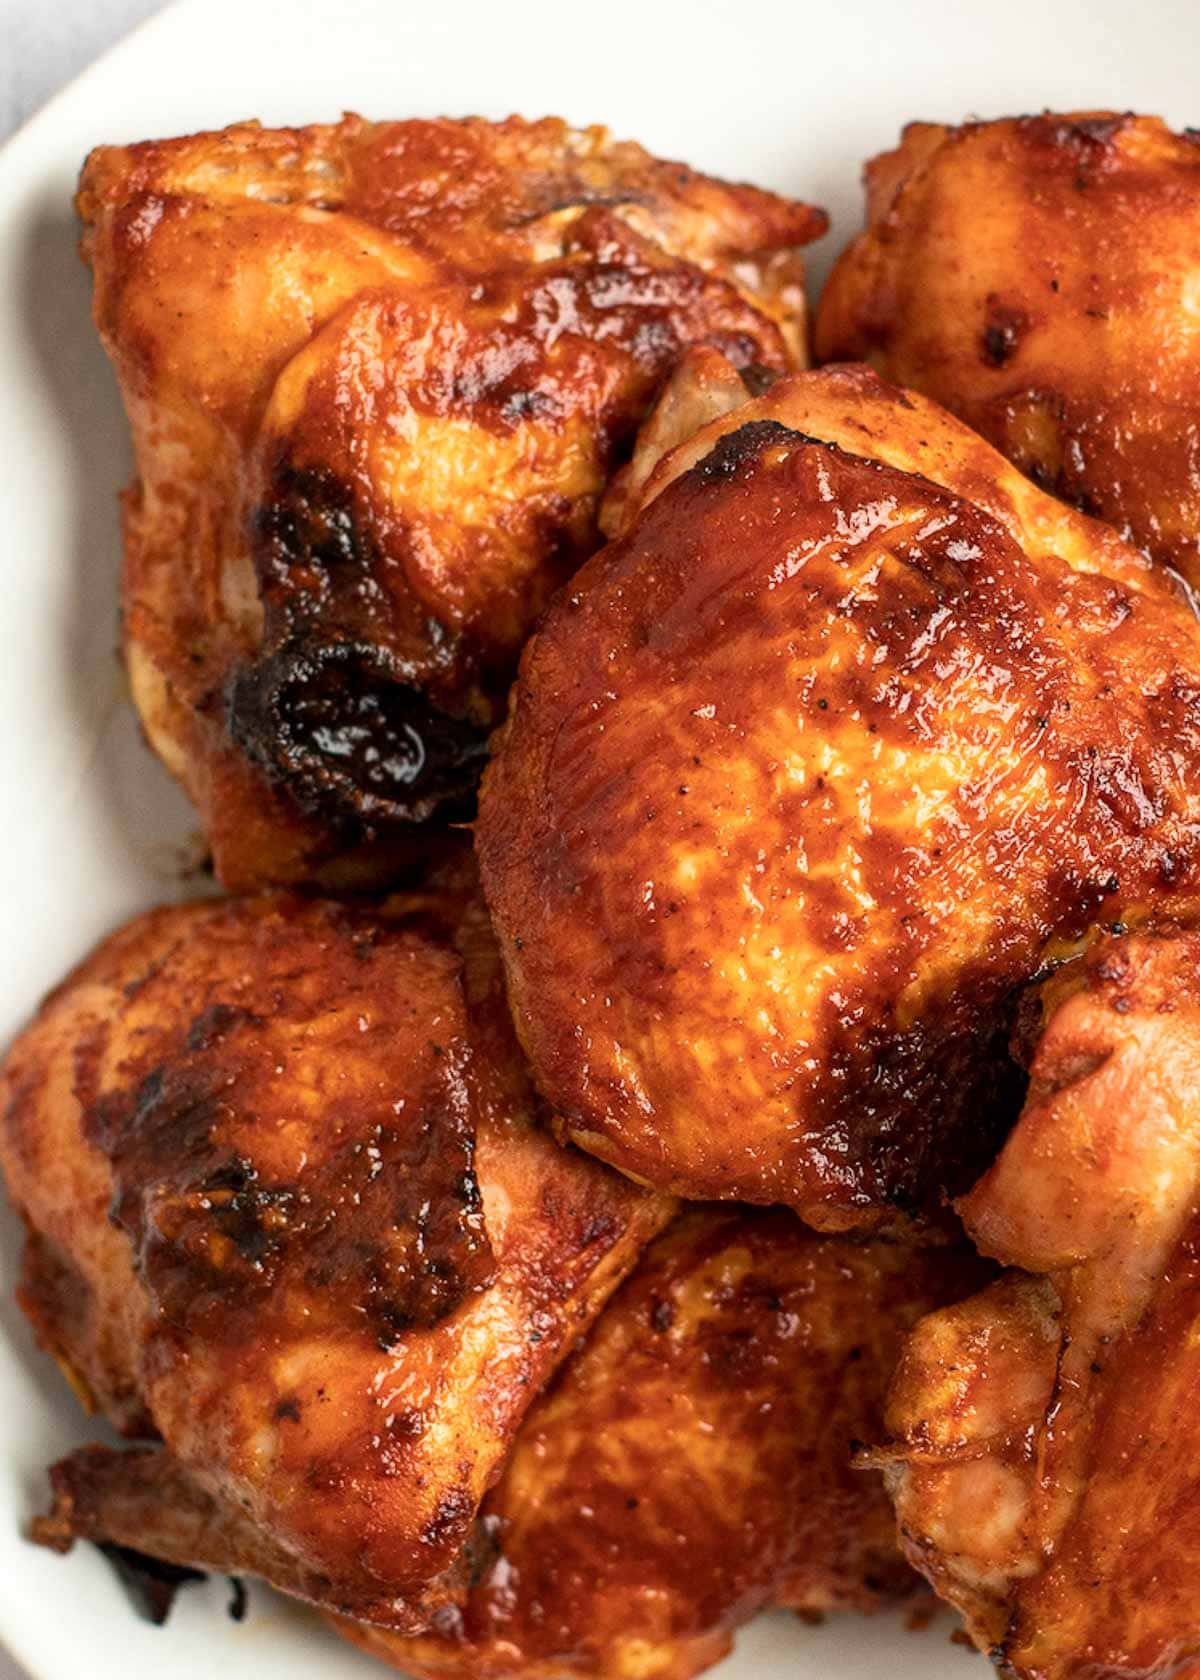 These Baked BBQ Chicken Thighs are easy enough for a weeknight! This smoky marinade keeps chicken super juicy and full of flavor.